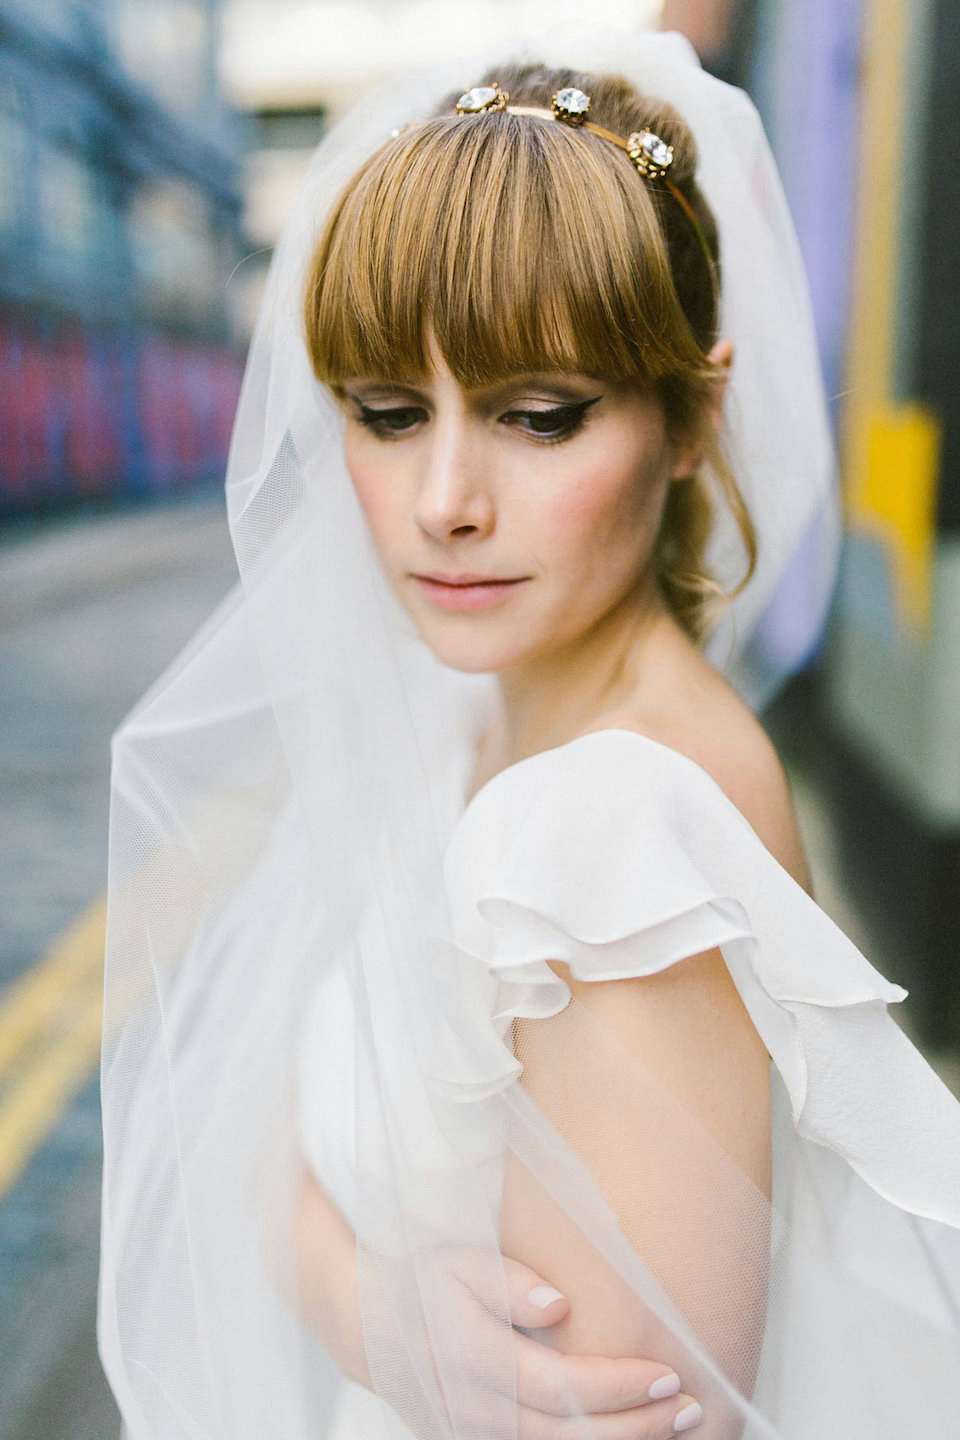 Bride Carly wears a Belle & Bunty gown for her cool East London wedding at the ACE hotel, Shoreditch. Photography by Alain M.